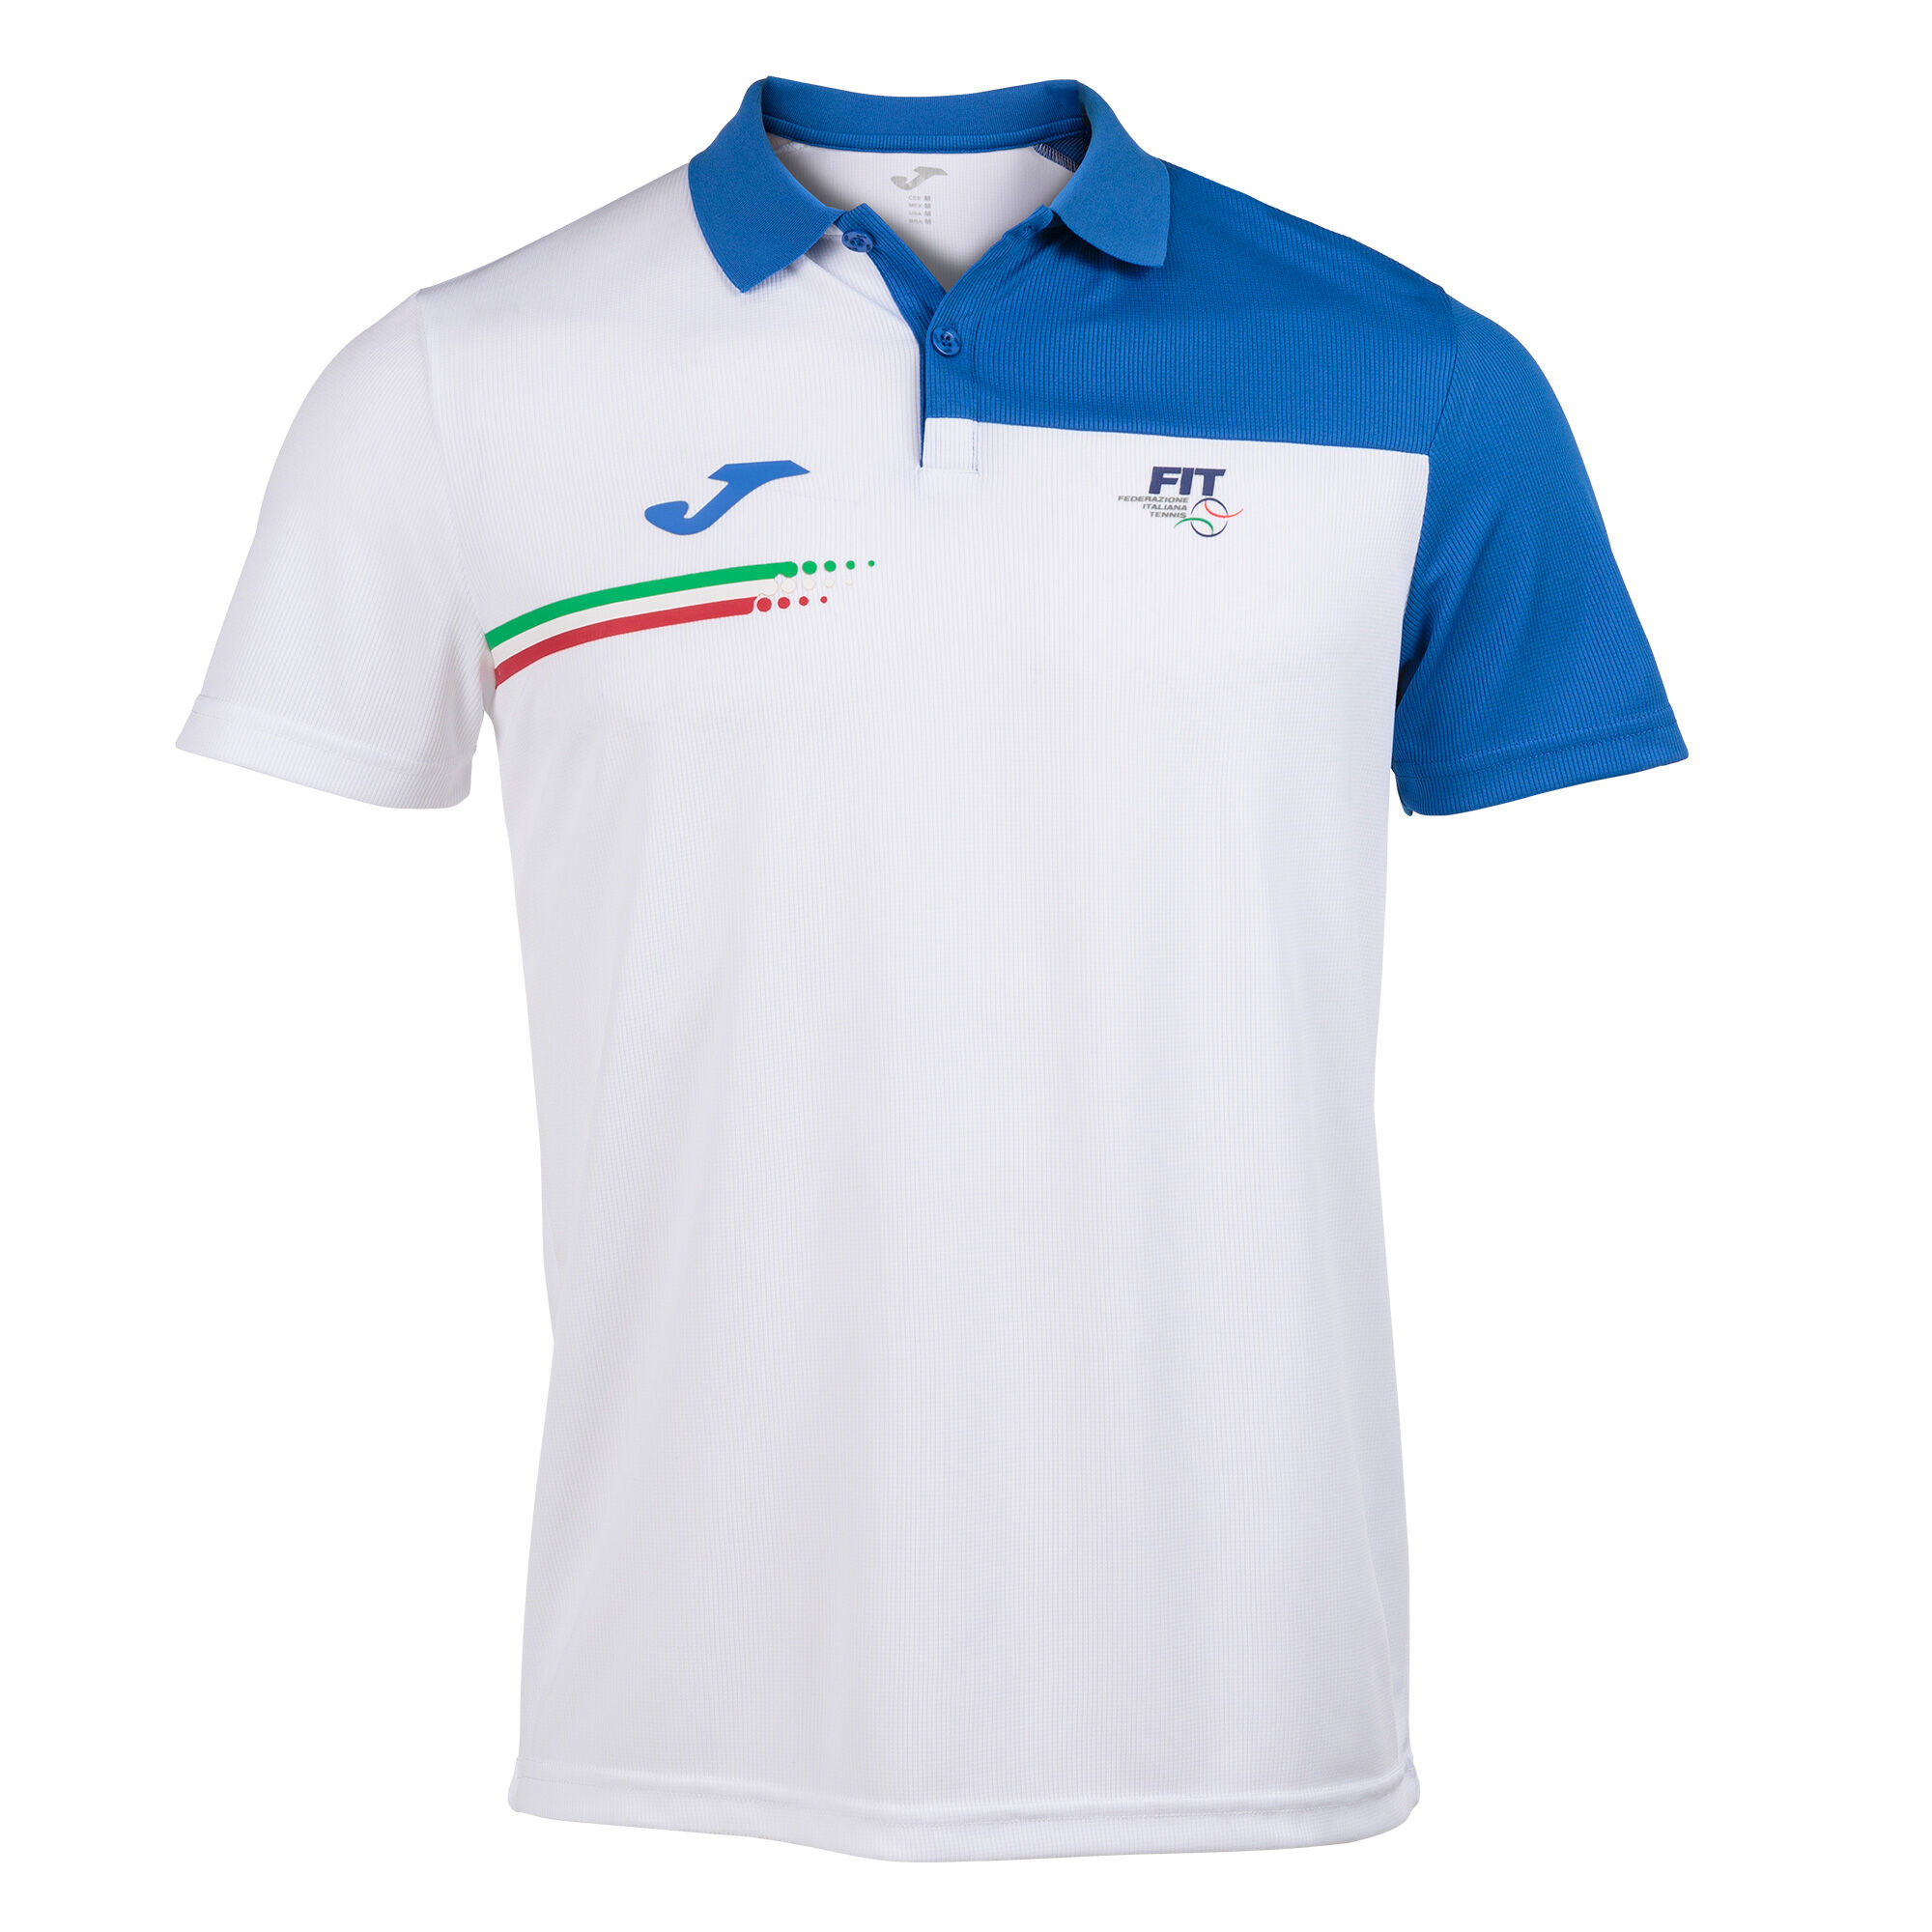 POLO FED. TENIS IT.  M/C image number null